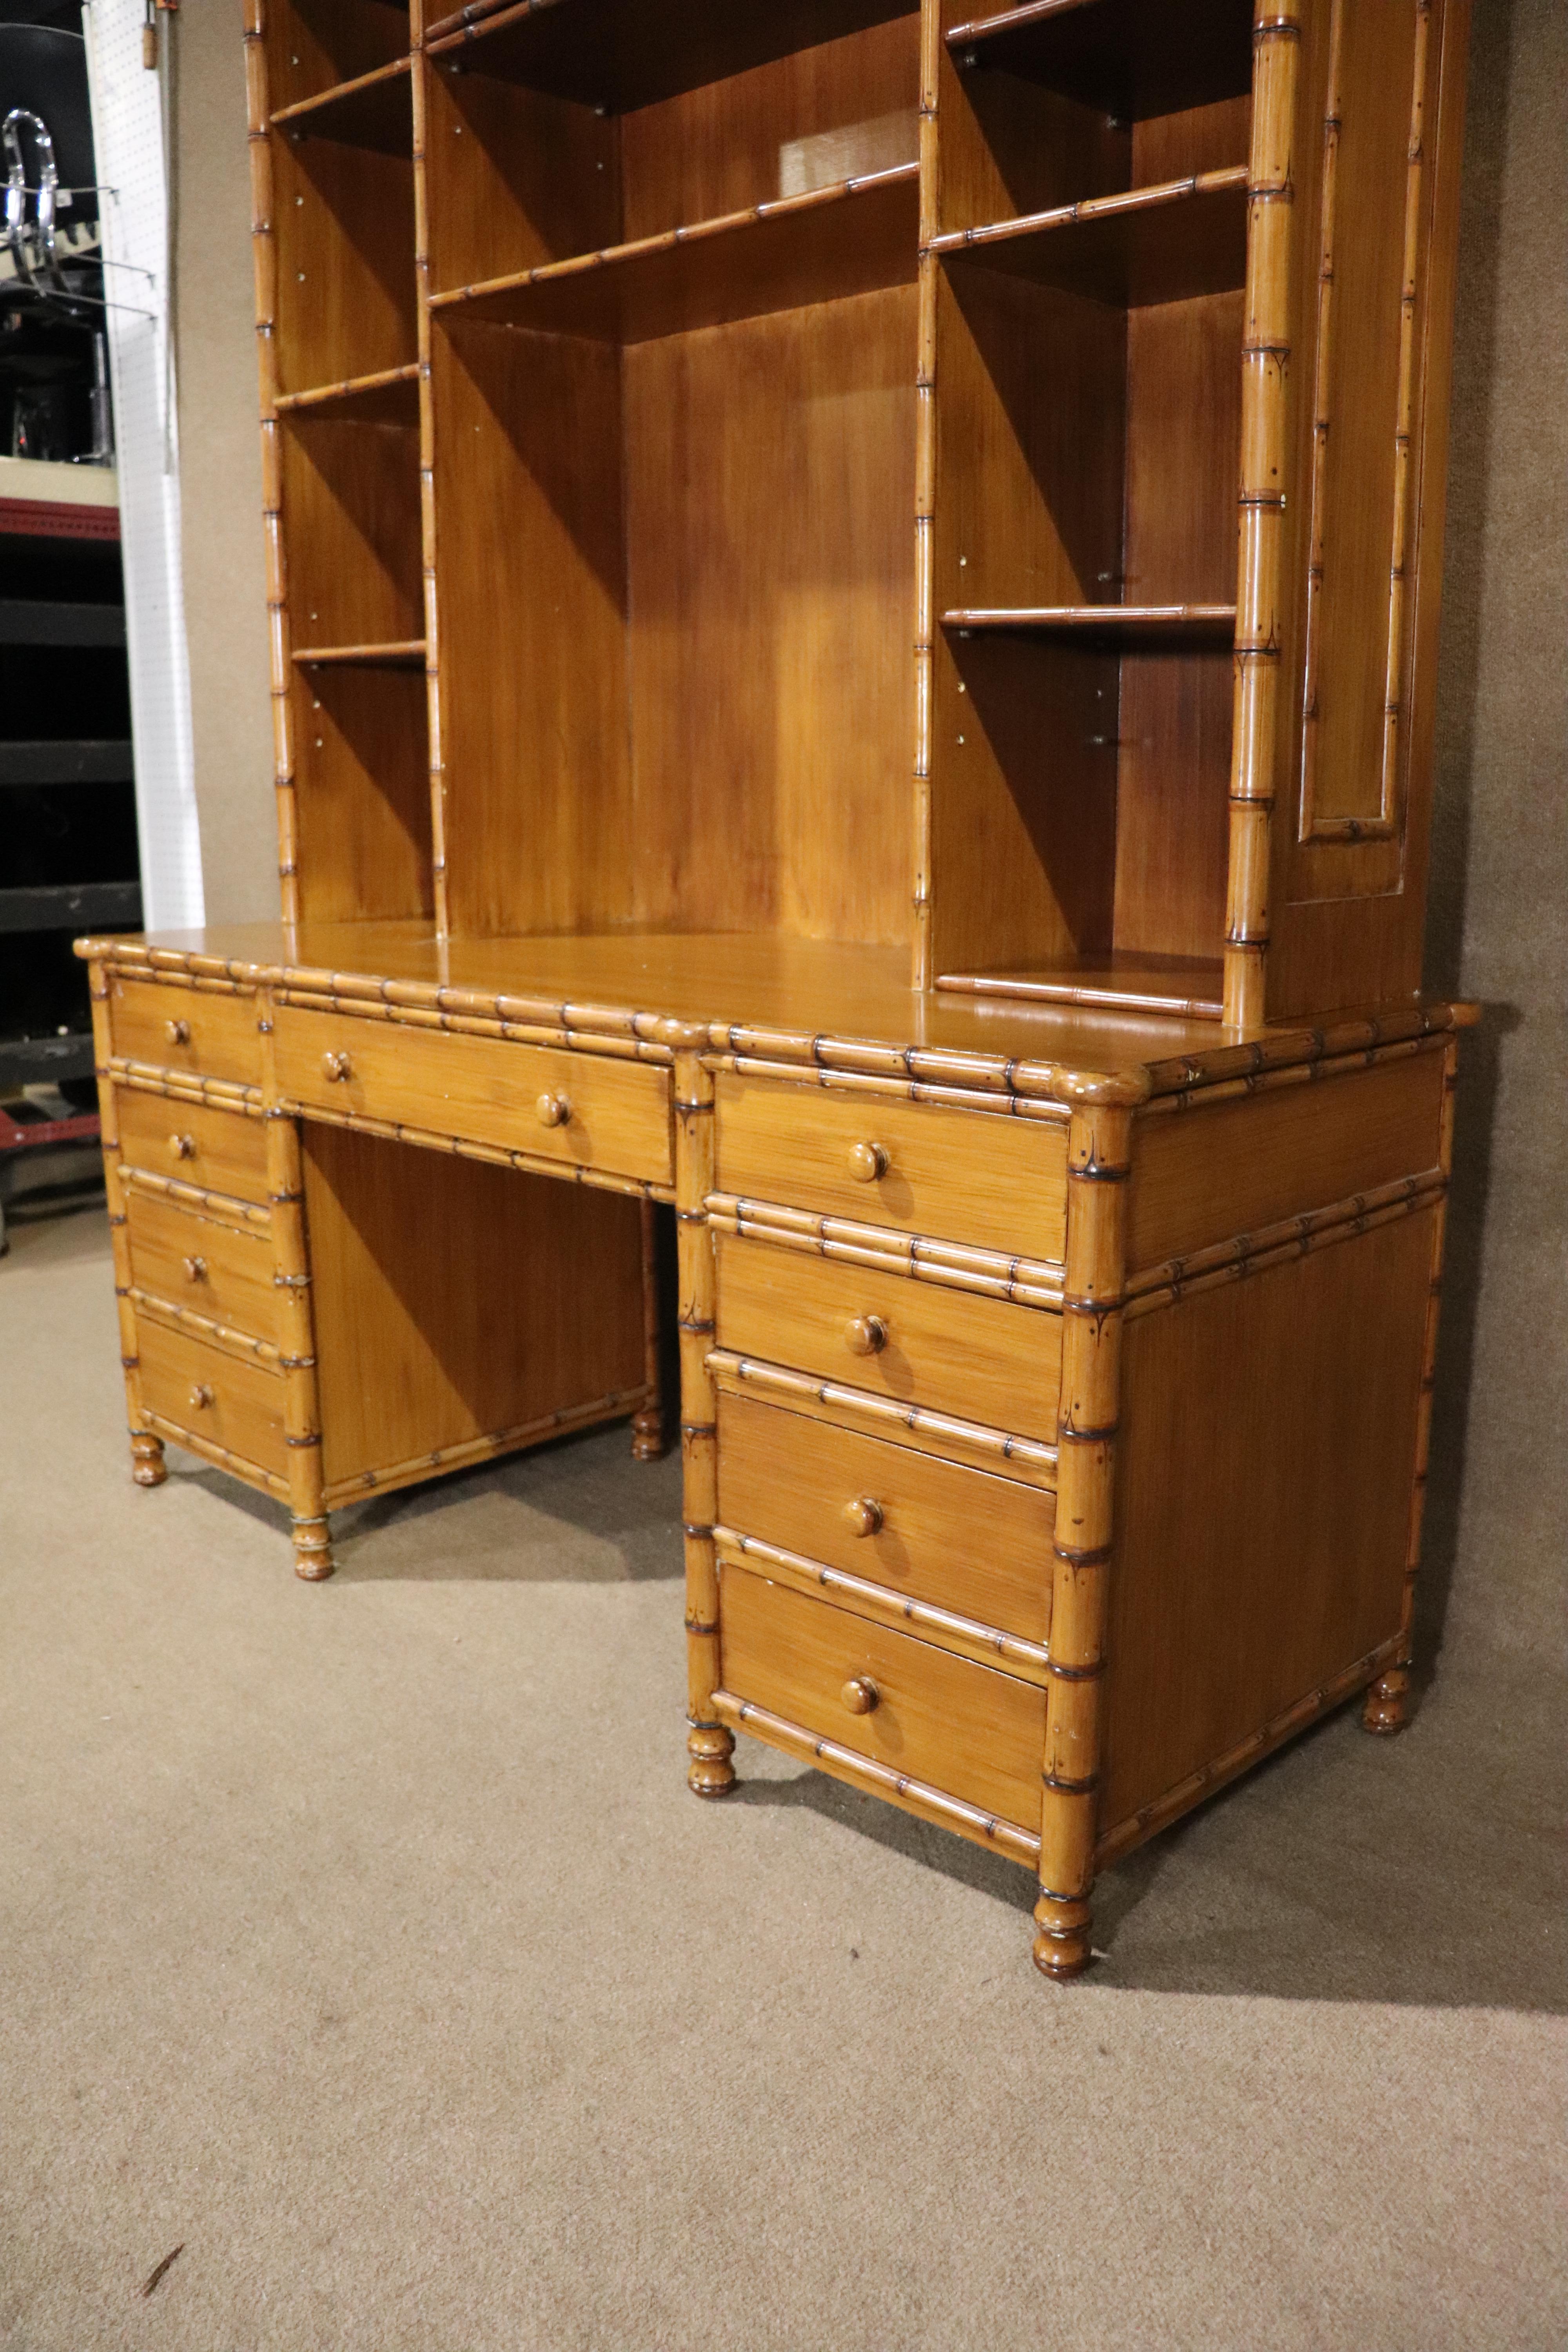 This large desk unit and chair are made with a bamboo style wood. Great detailing and ample storage. Desk has nine drawers and the topper has many adjustable shelves.
Chair: 38h, 18.25w, 18d, 18 seat height
Please confirm location NY or NJ